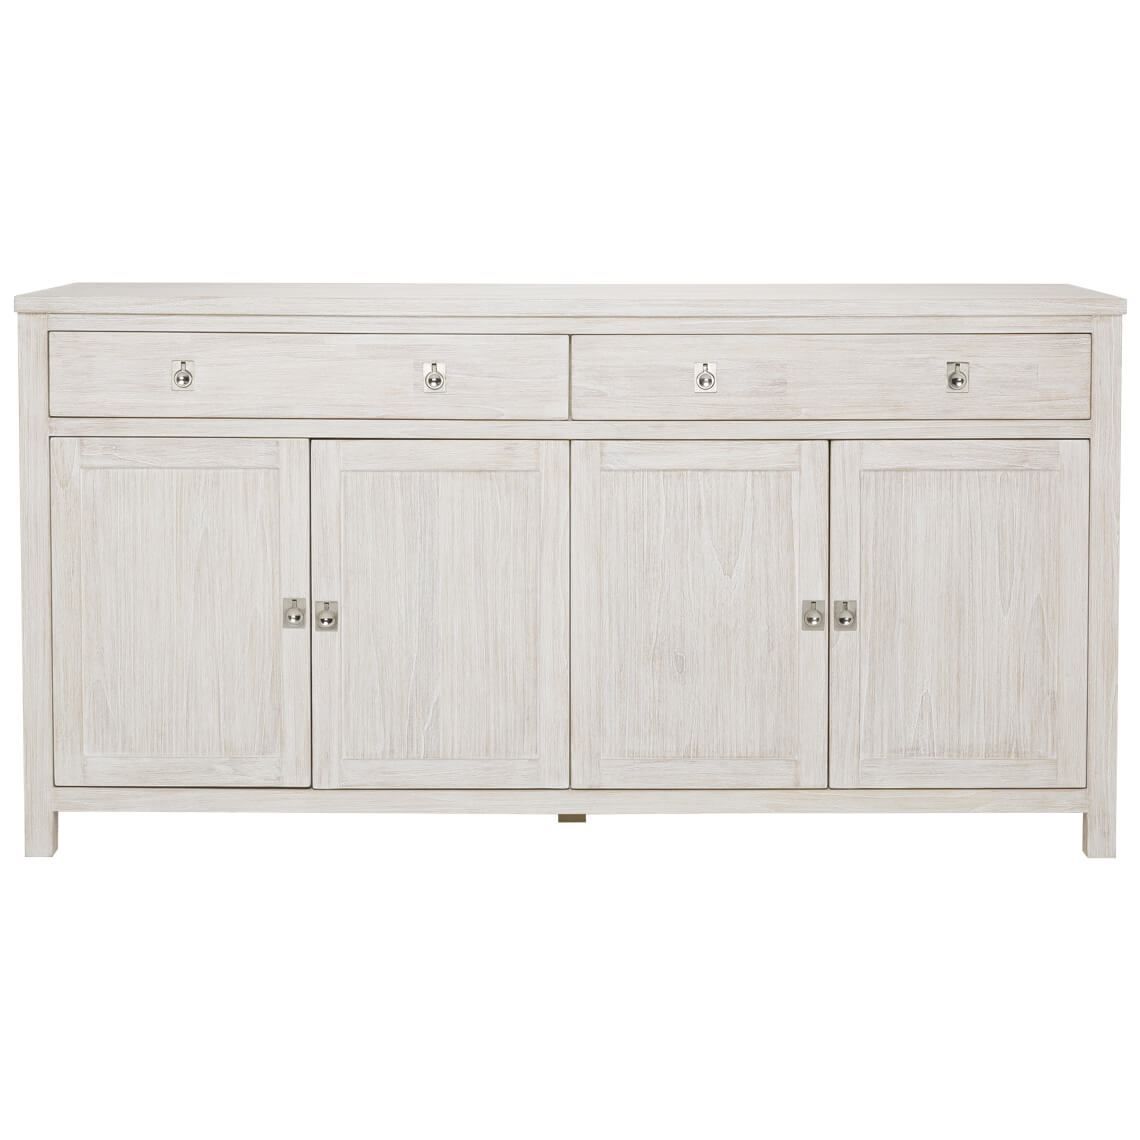 Cancun Buffet | Freedom In Latest 4 Door 3 Drawer White Wash Sideboards (View 13 of 20)